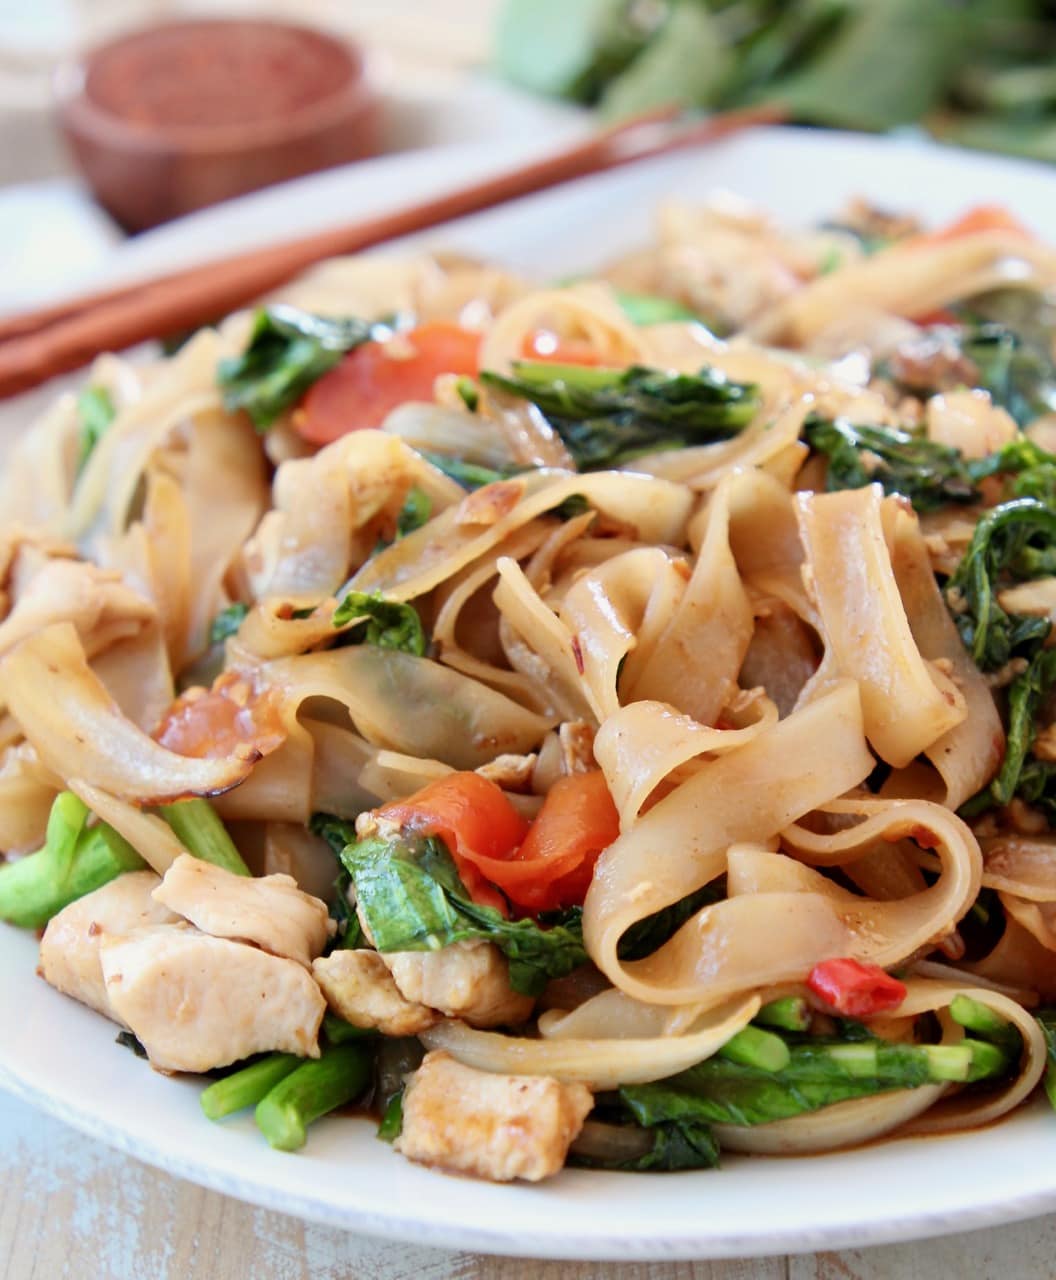 Thai wide noodles stir fried with Chinese broccoli on white plate